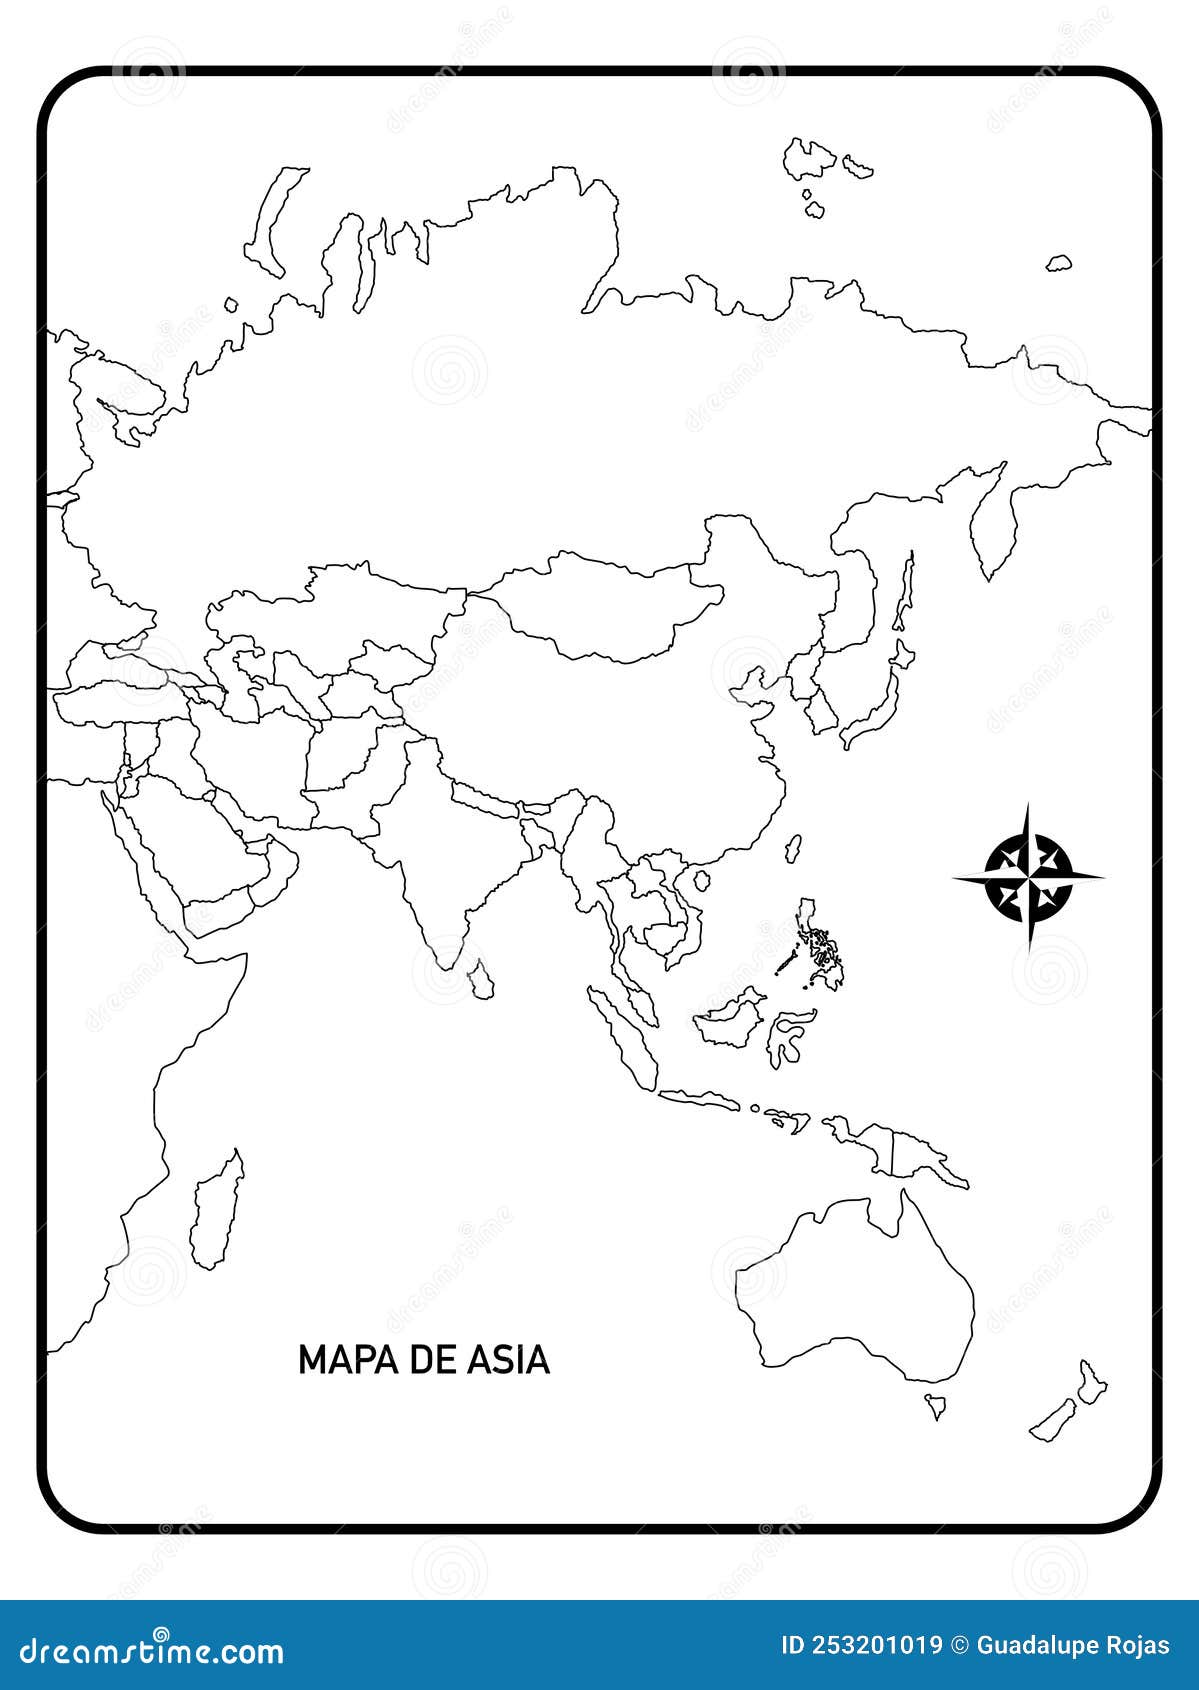 school map of the asian continent, geography and political division of asia